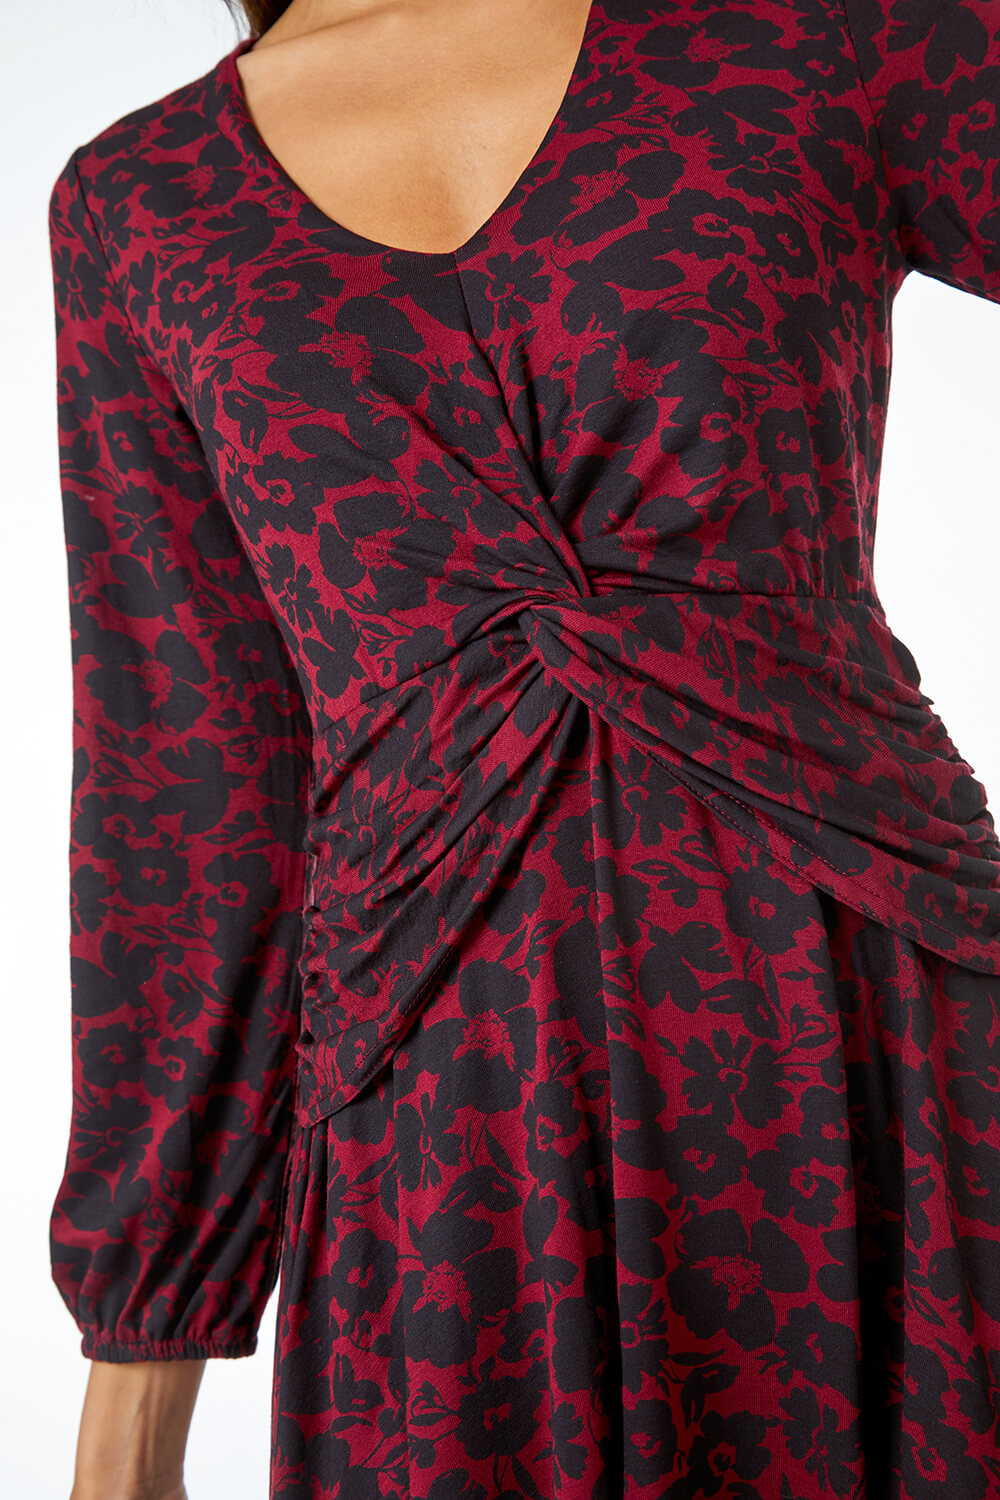 Red Floral Twist Stretch Ruched Jersey Dress, Image 5 of 5